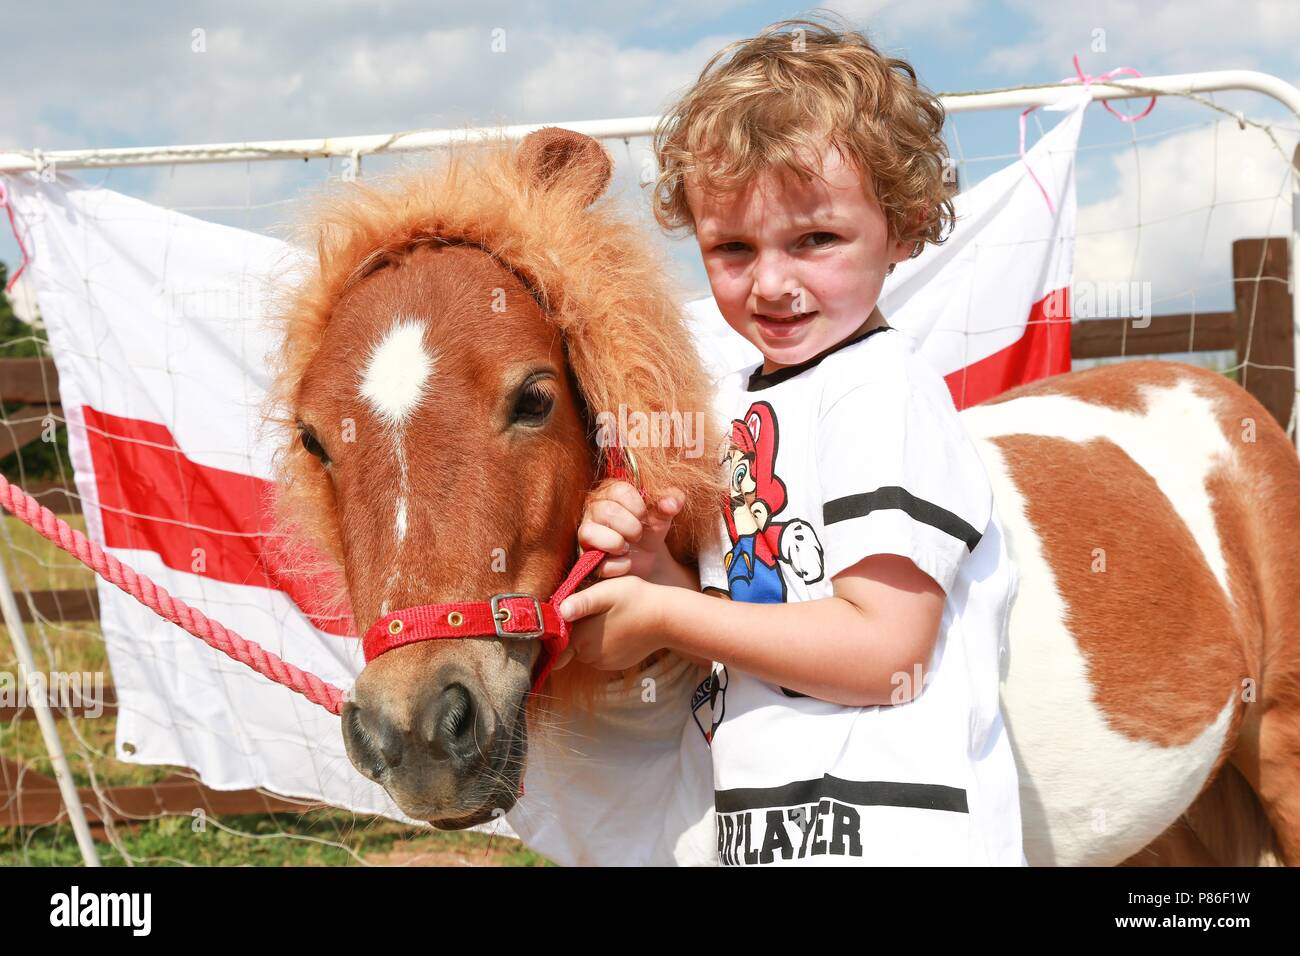 5 year old boy and his shetland pony dressed in England football kit, UK Stock Photo